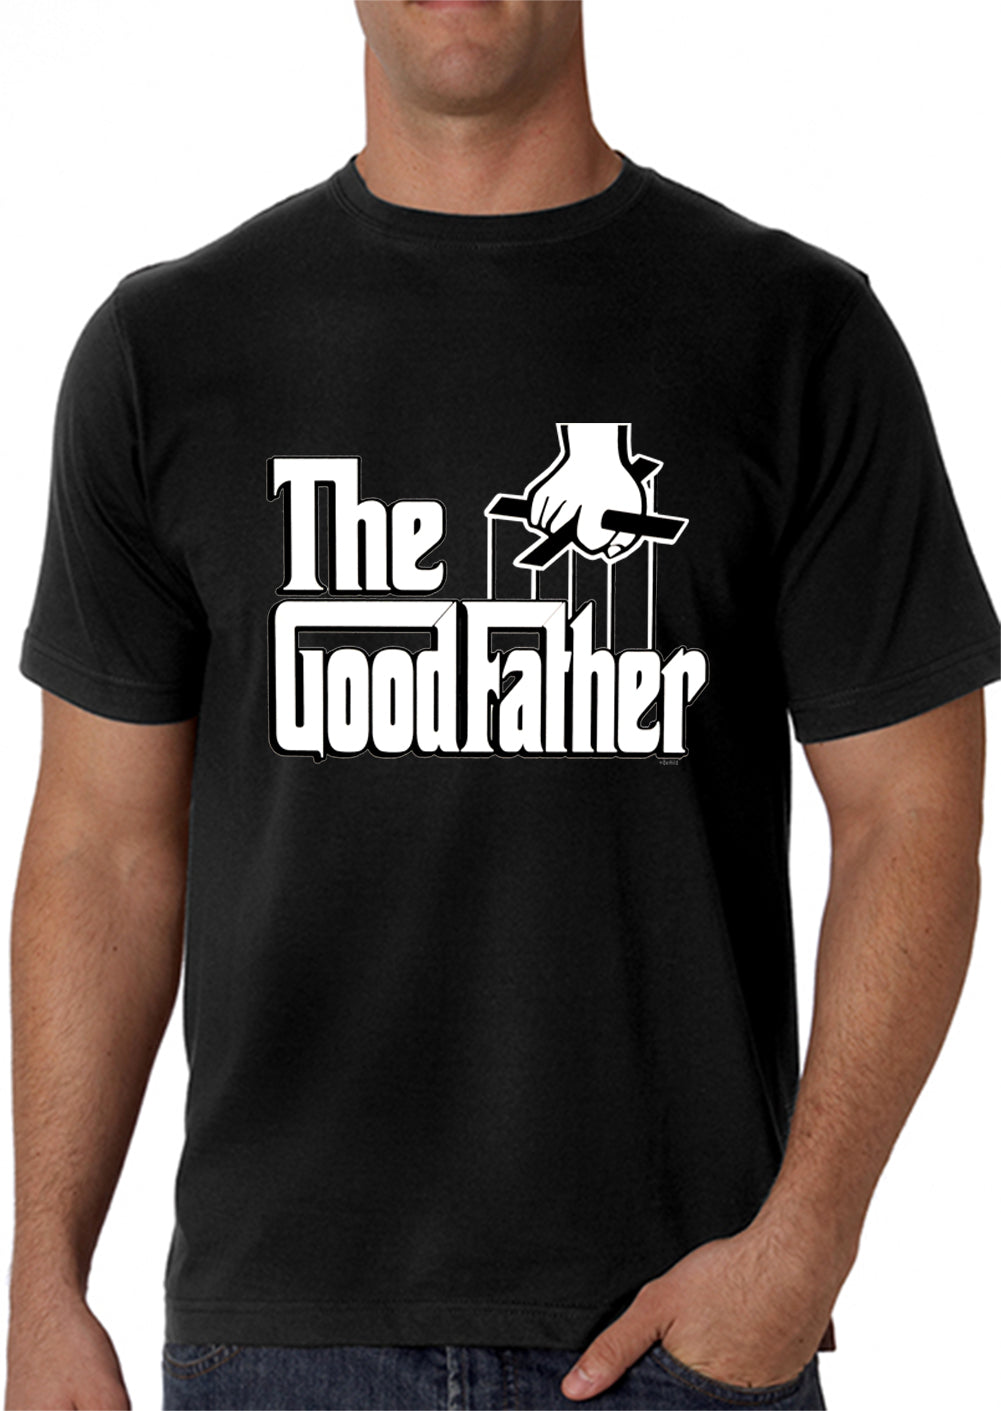  The Good Father Men's T-Shirt